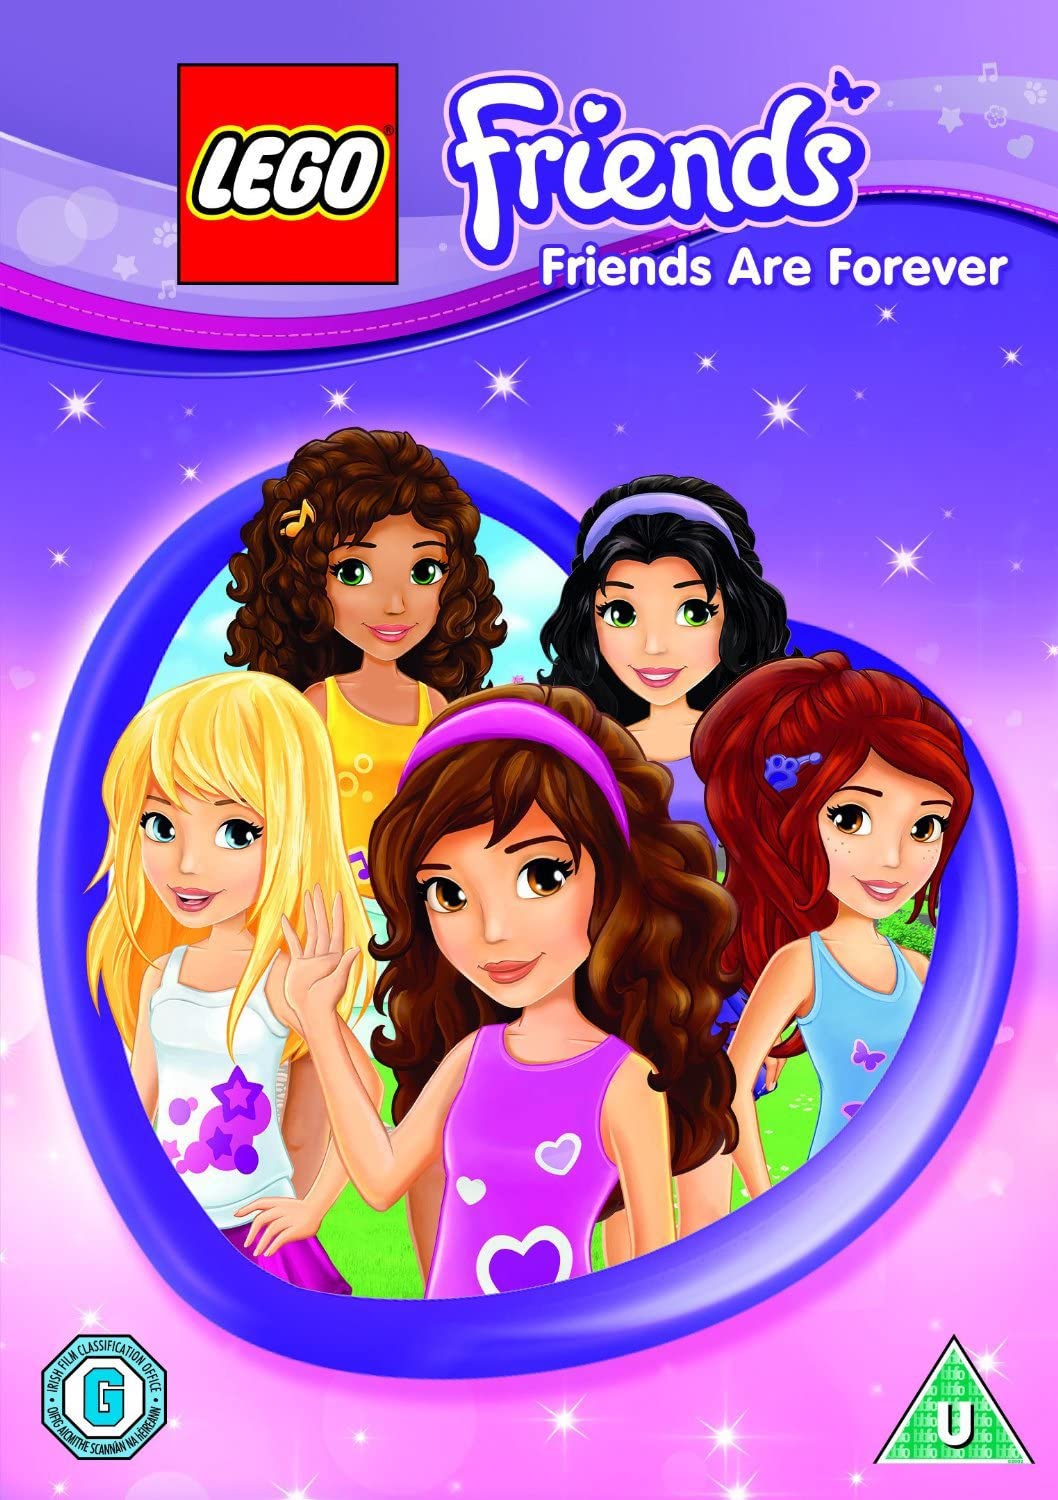 Lego Friends: Friends Are Forever (incluye hoja para colorear) [DVD]